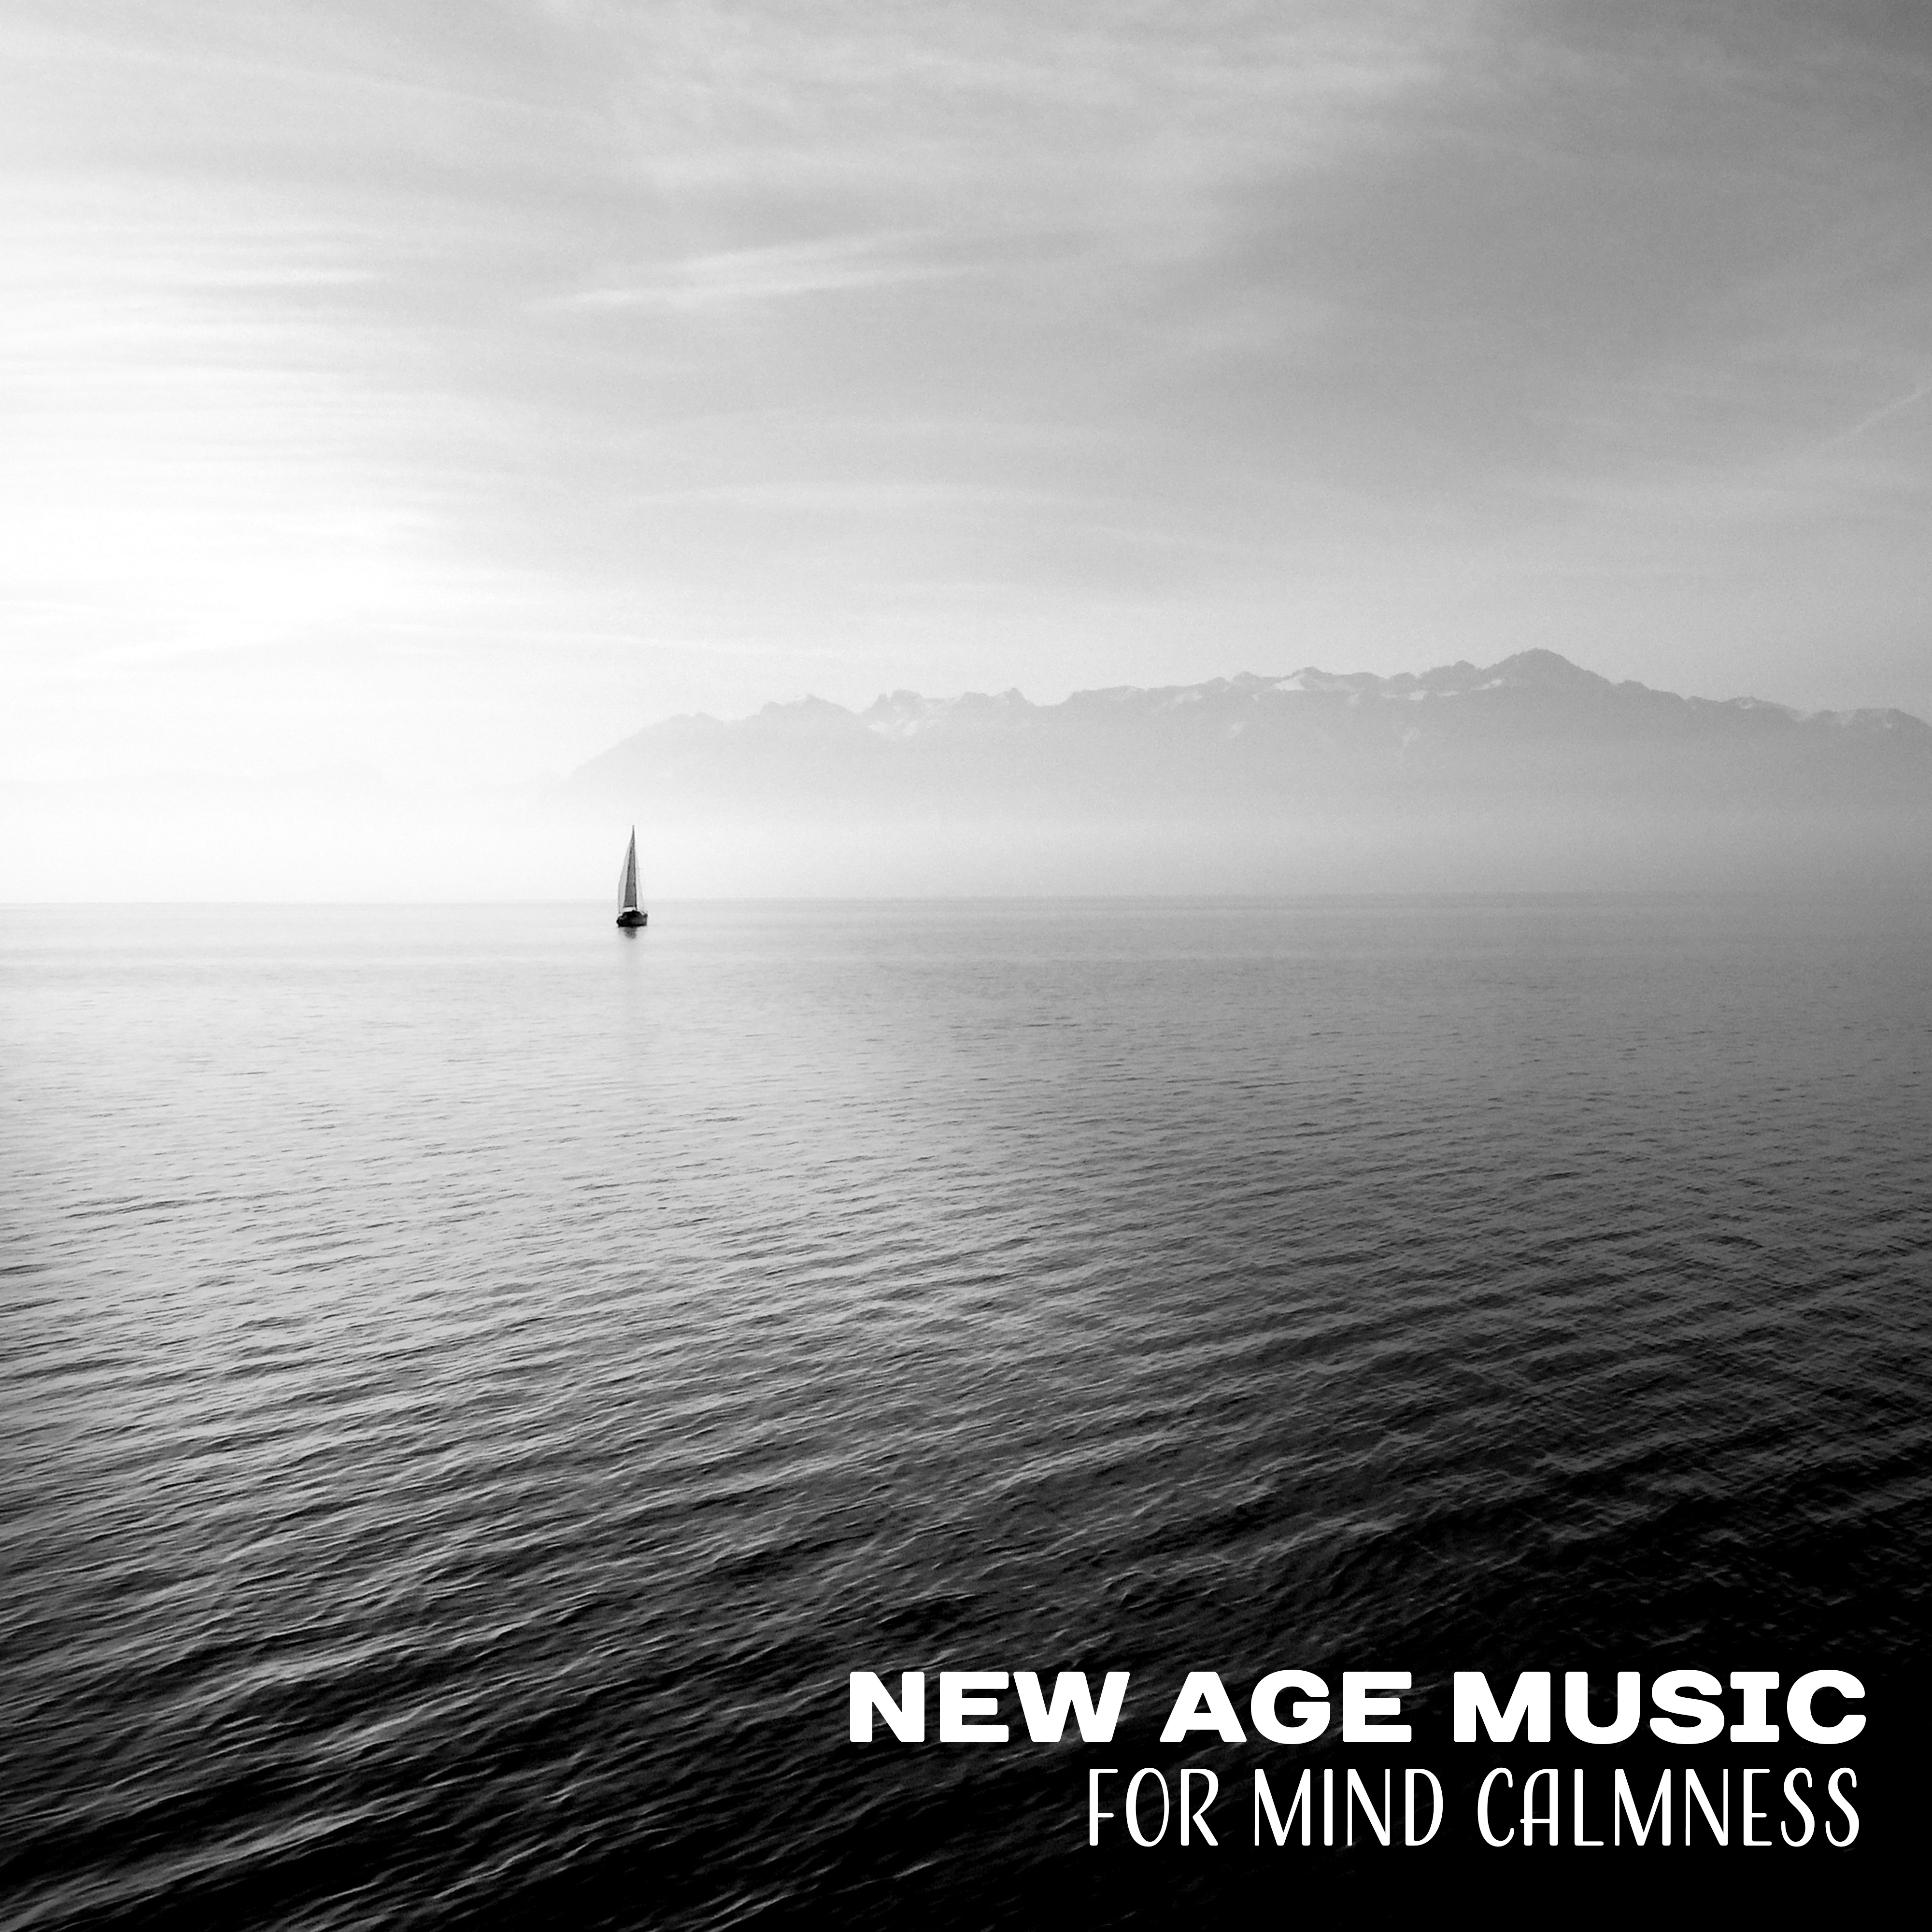 New Age Music for Mind Calmness